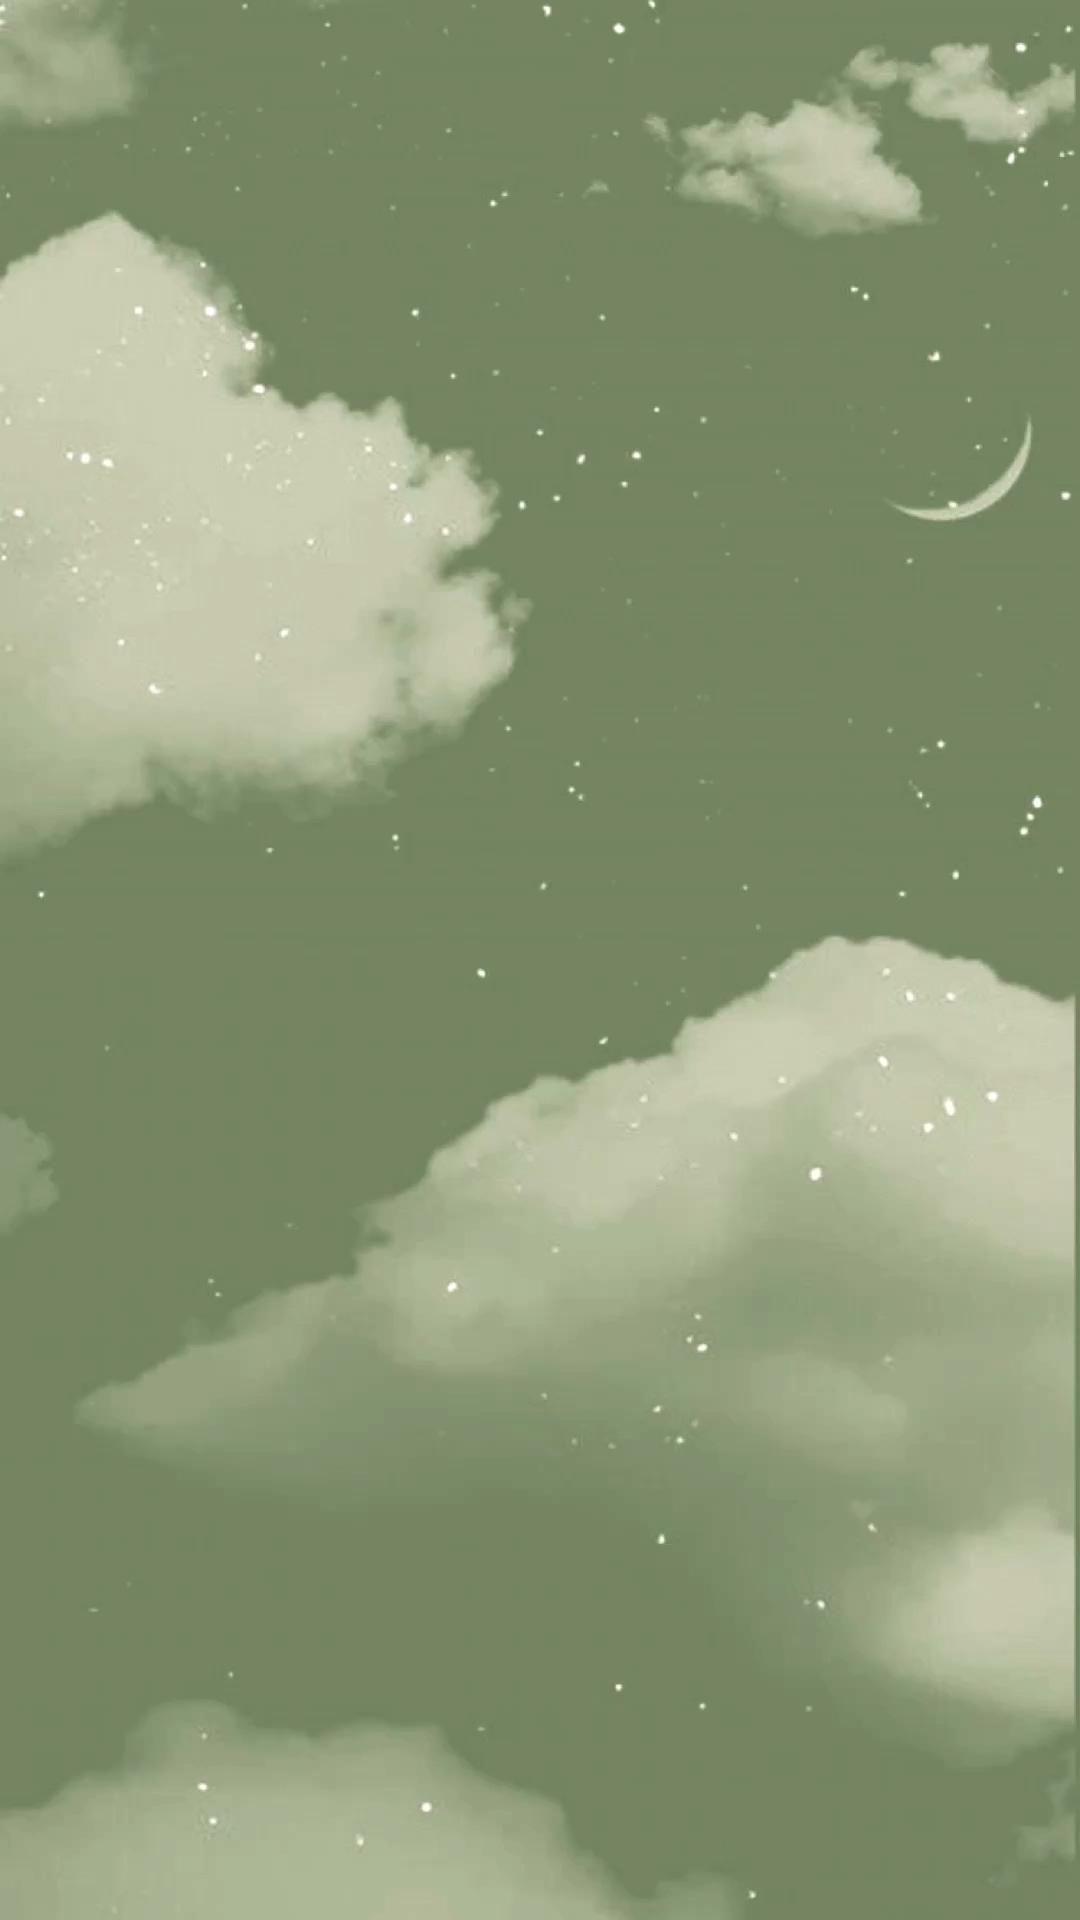 A green sky with clouds and stars - Pastel green